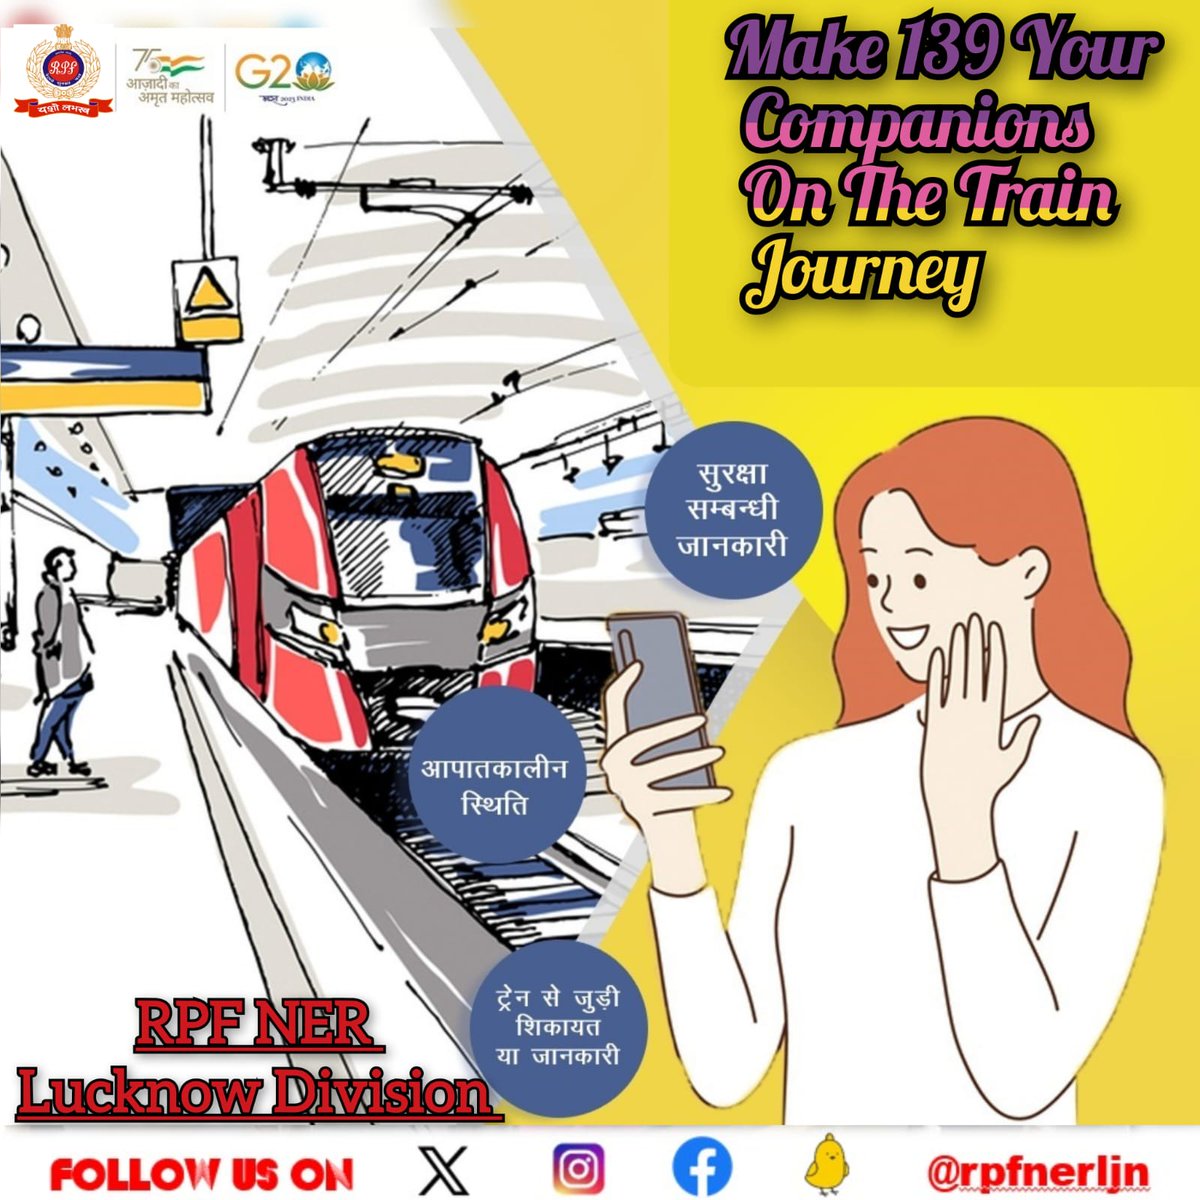 Dial Rail Madad Integrated  *Helpline number 139* and seek answers to all your queries/concerns during your Train journey.
 #Dial139 
#IndianRailways #StayAlert #StaySafe @drmljn 
@RPF_INDIA 
@rpfner 
#TickettoSuraksha